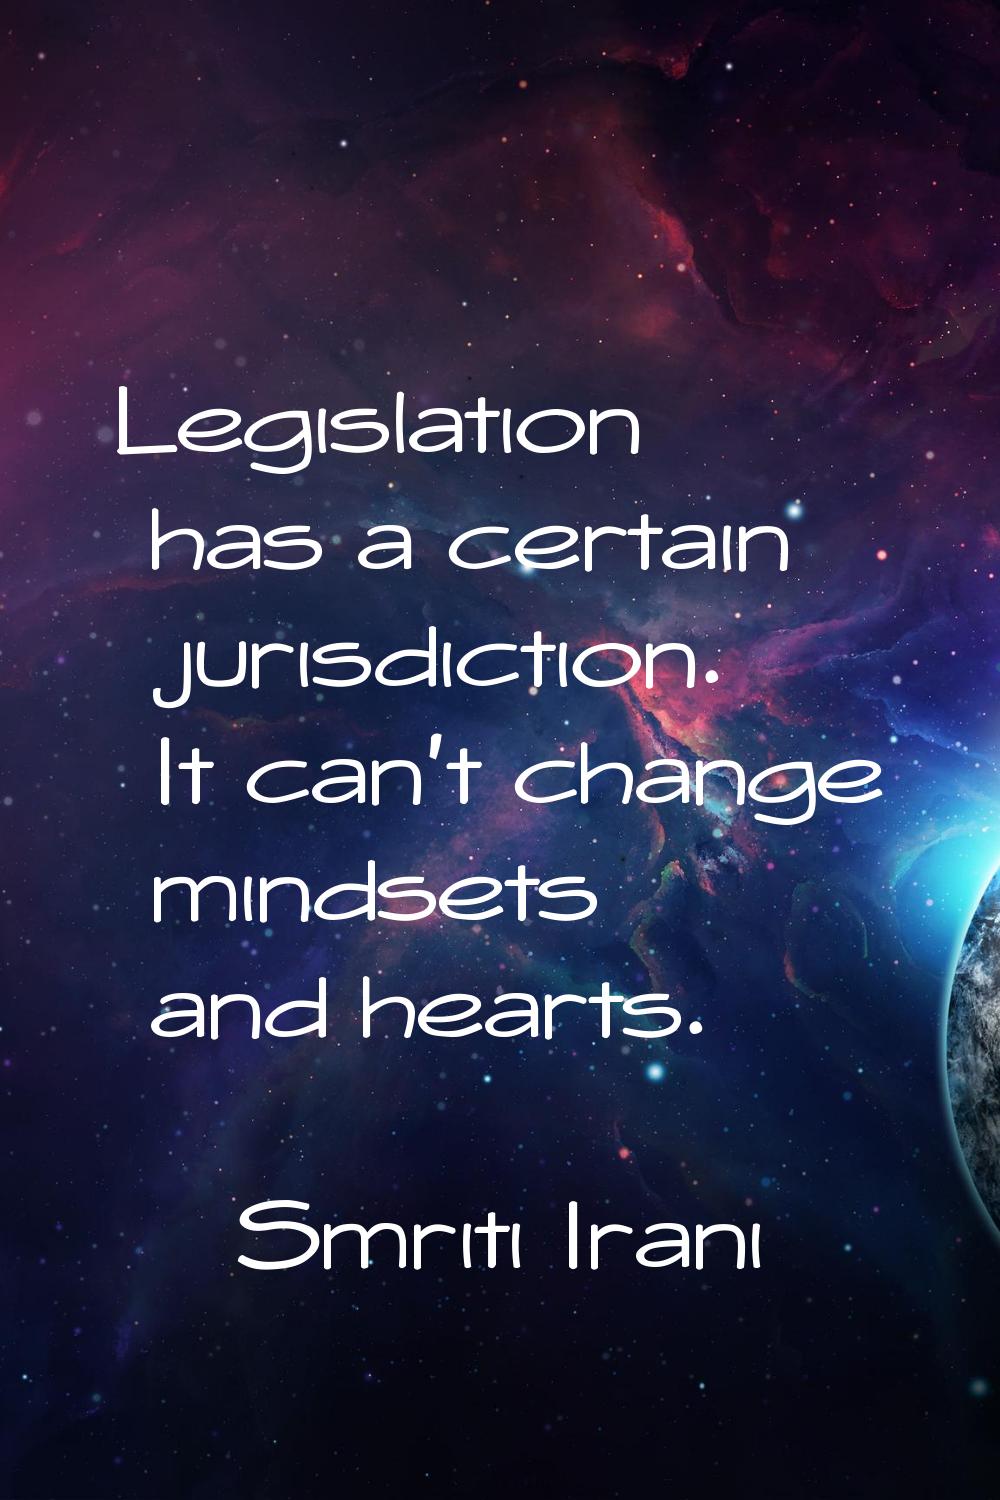 Legislation has a certain jurisdiction. It can't change mindsets and hearts.